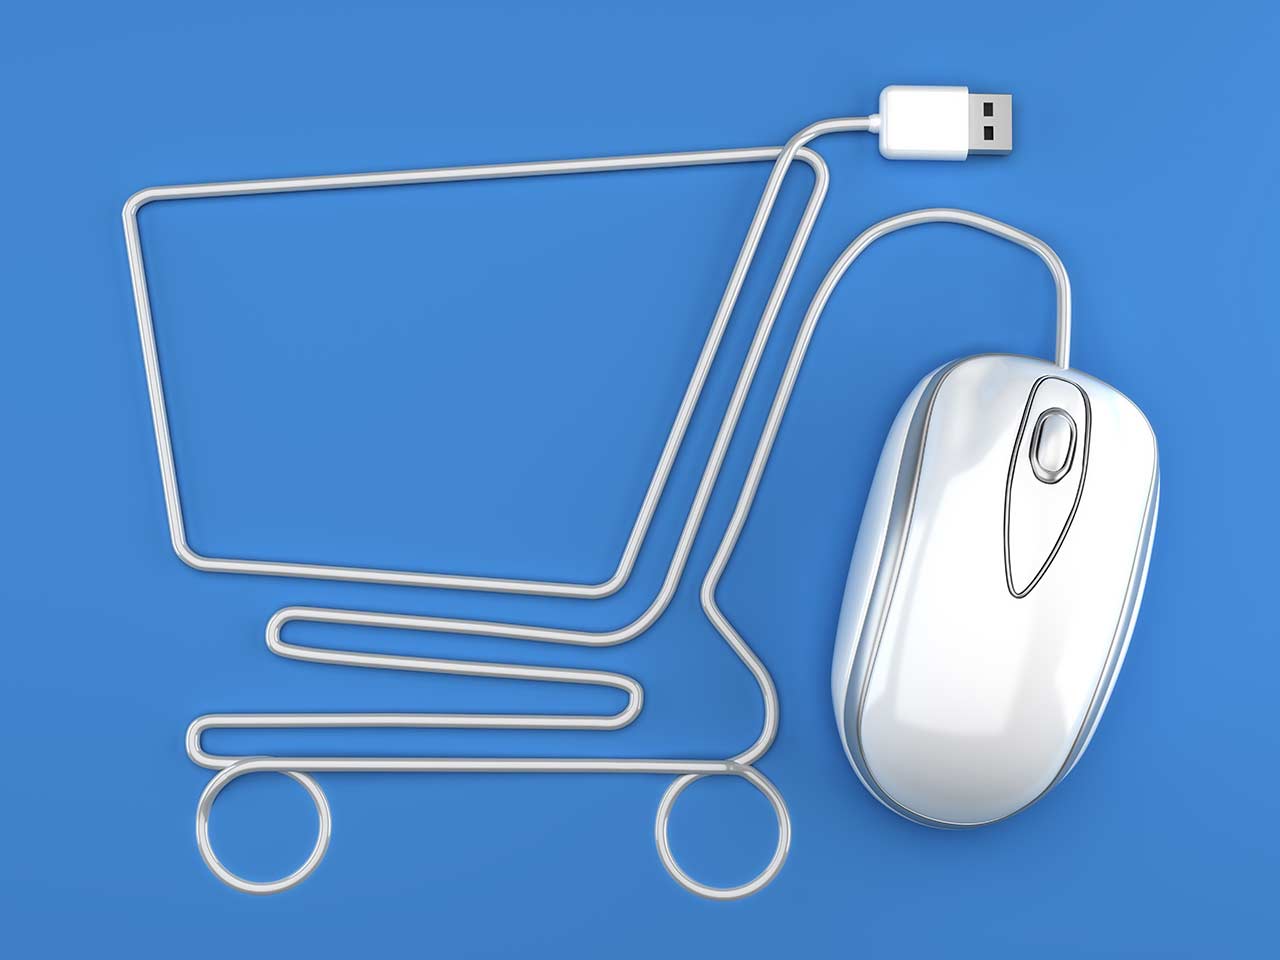 Shopping trolley image made from computer mouse